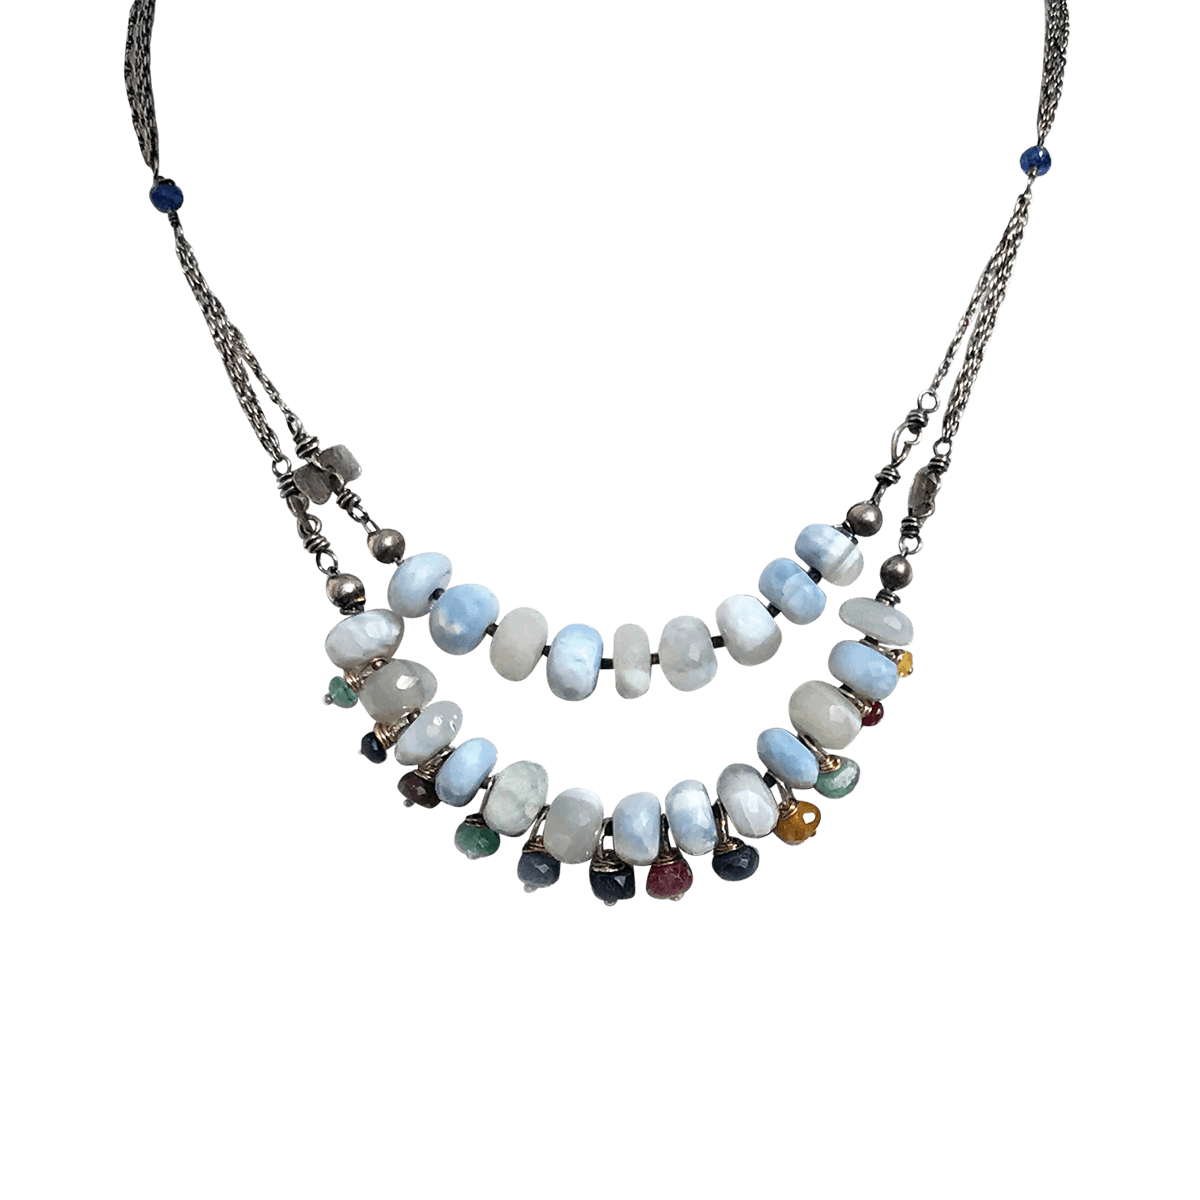 Buy Opal And Sapphire Sterling Silver Necklace Online | Shari Both ...